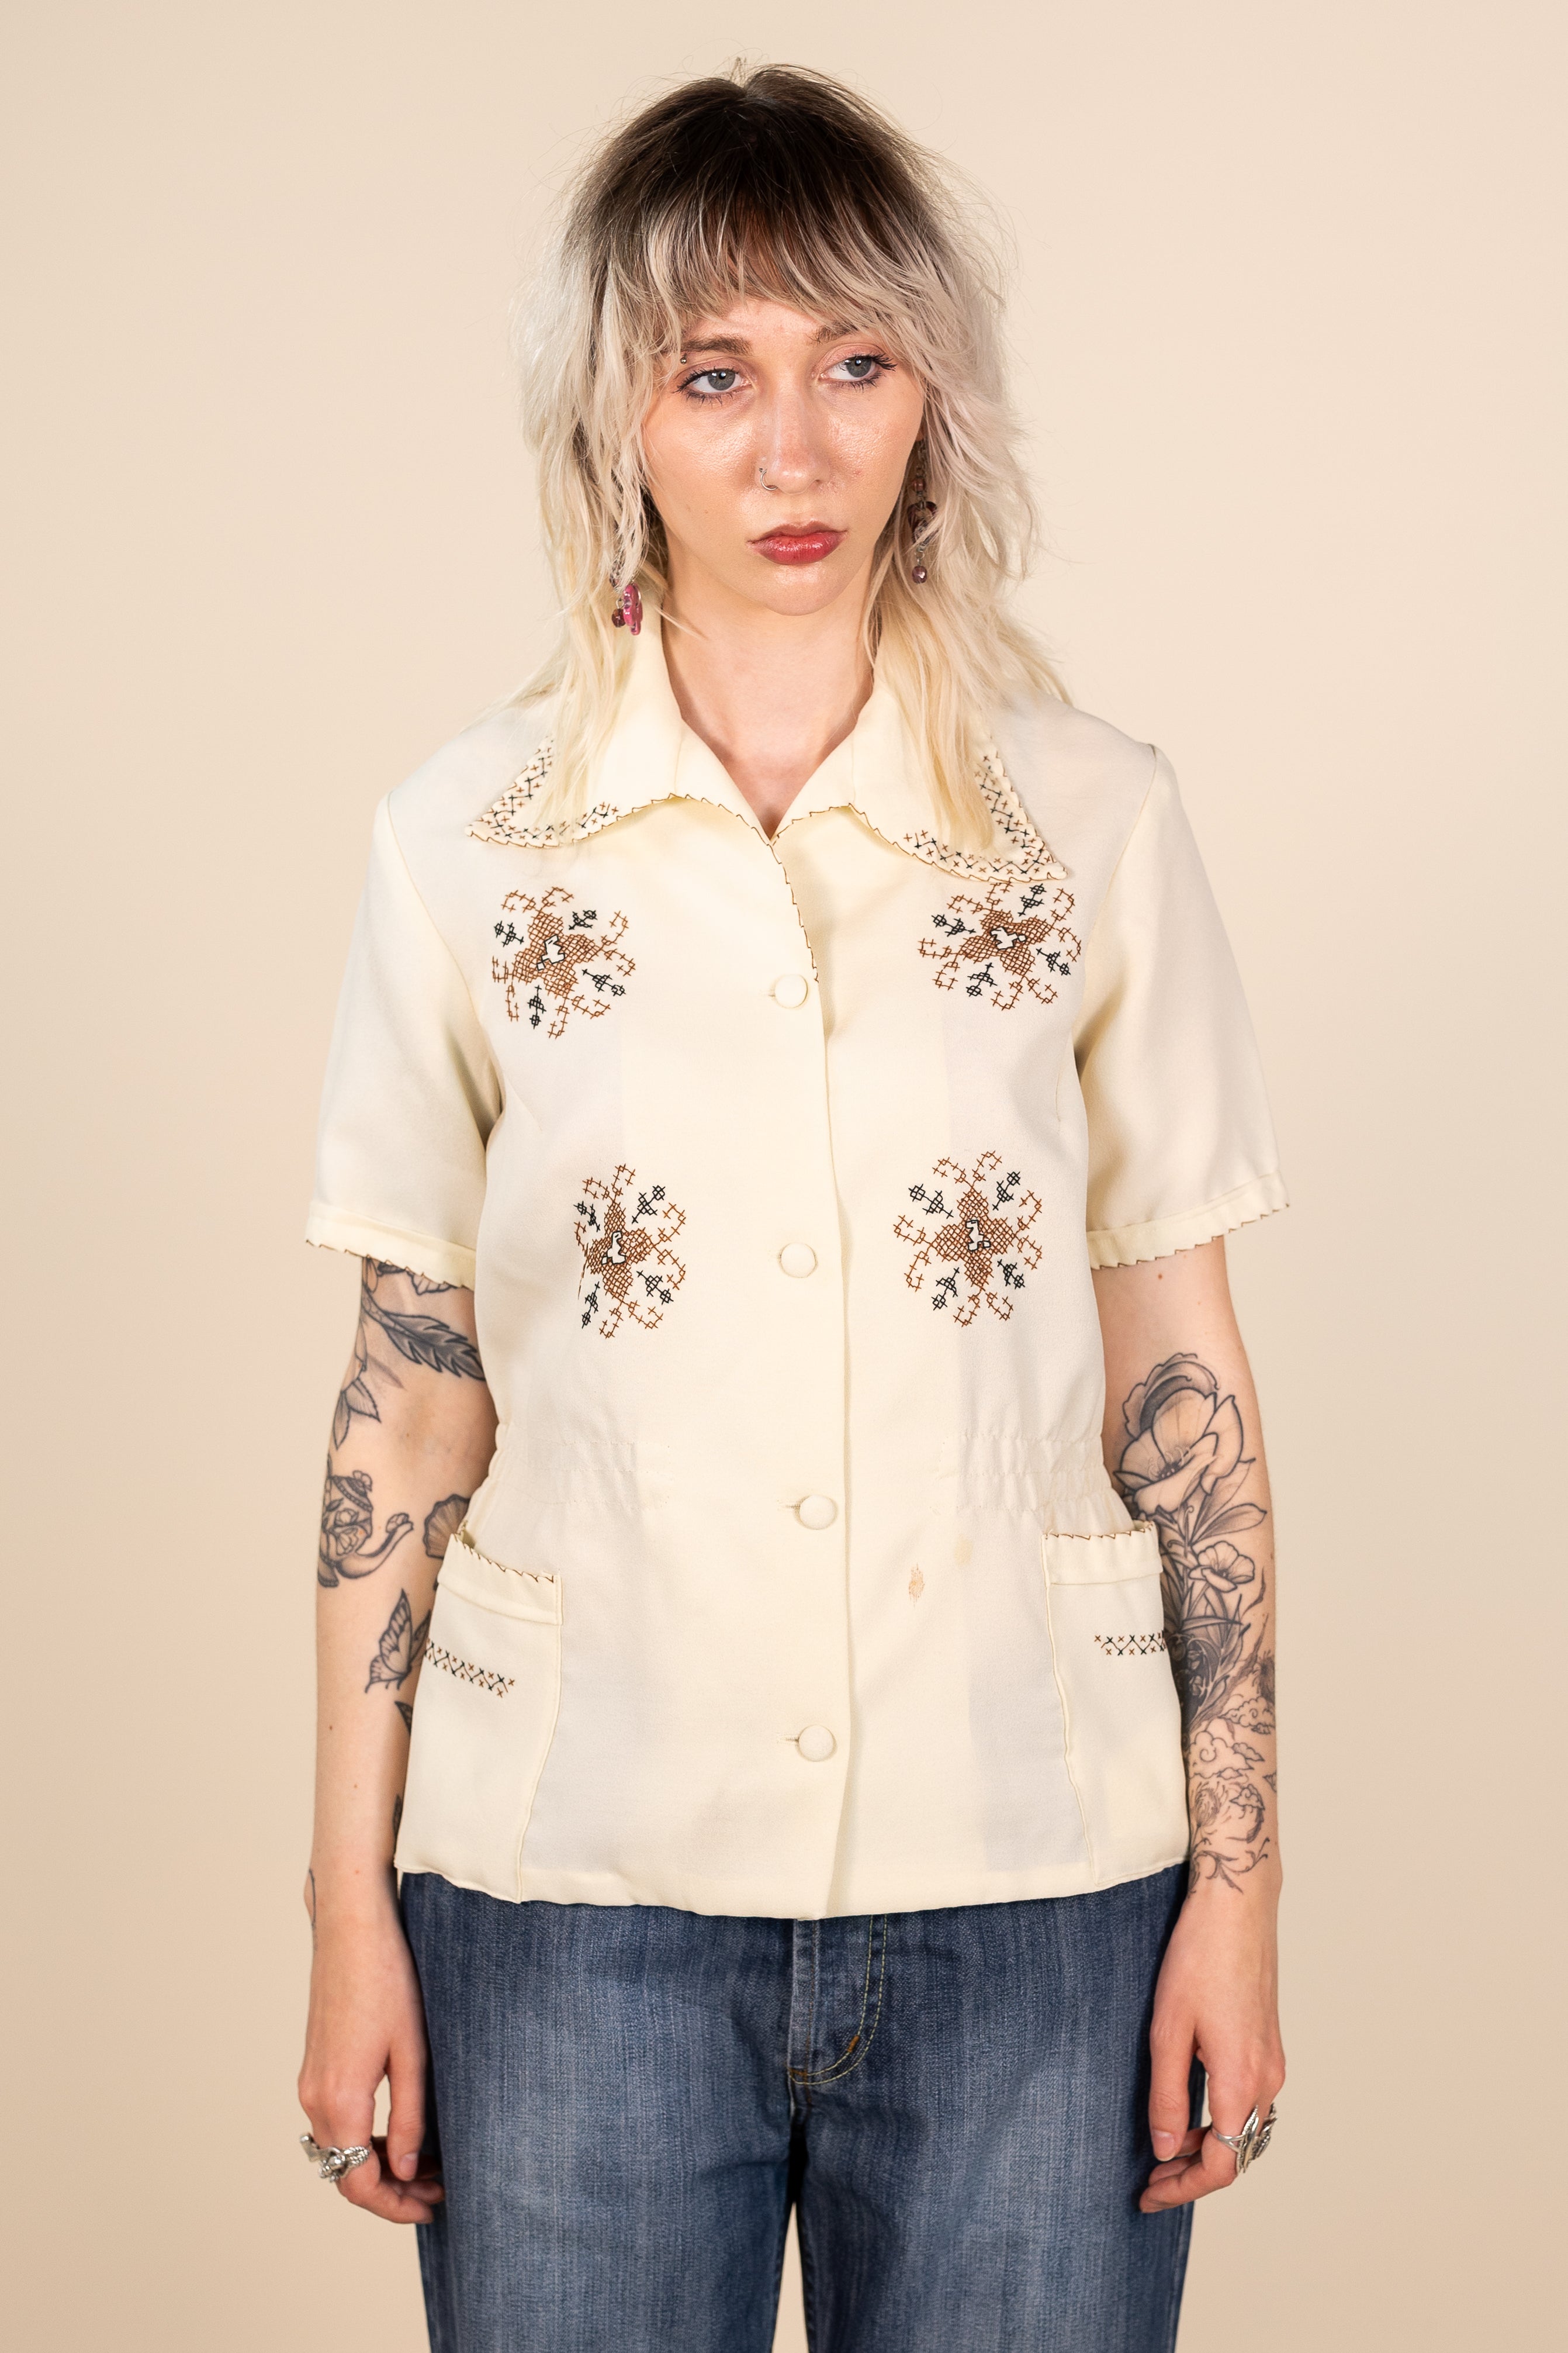 70s Shirt with Embroided Details